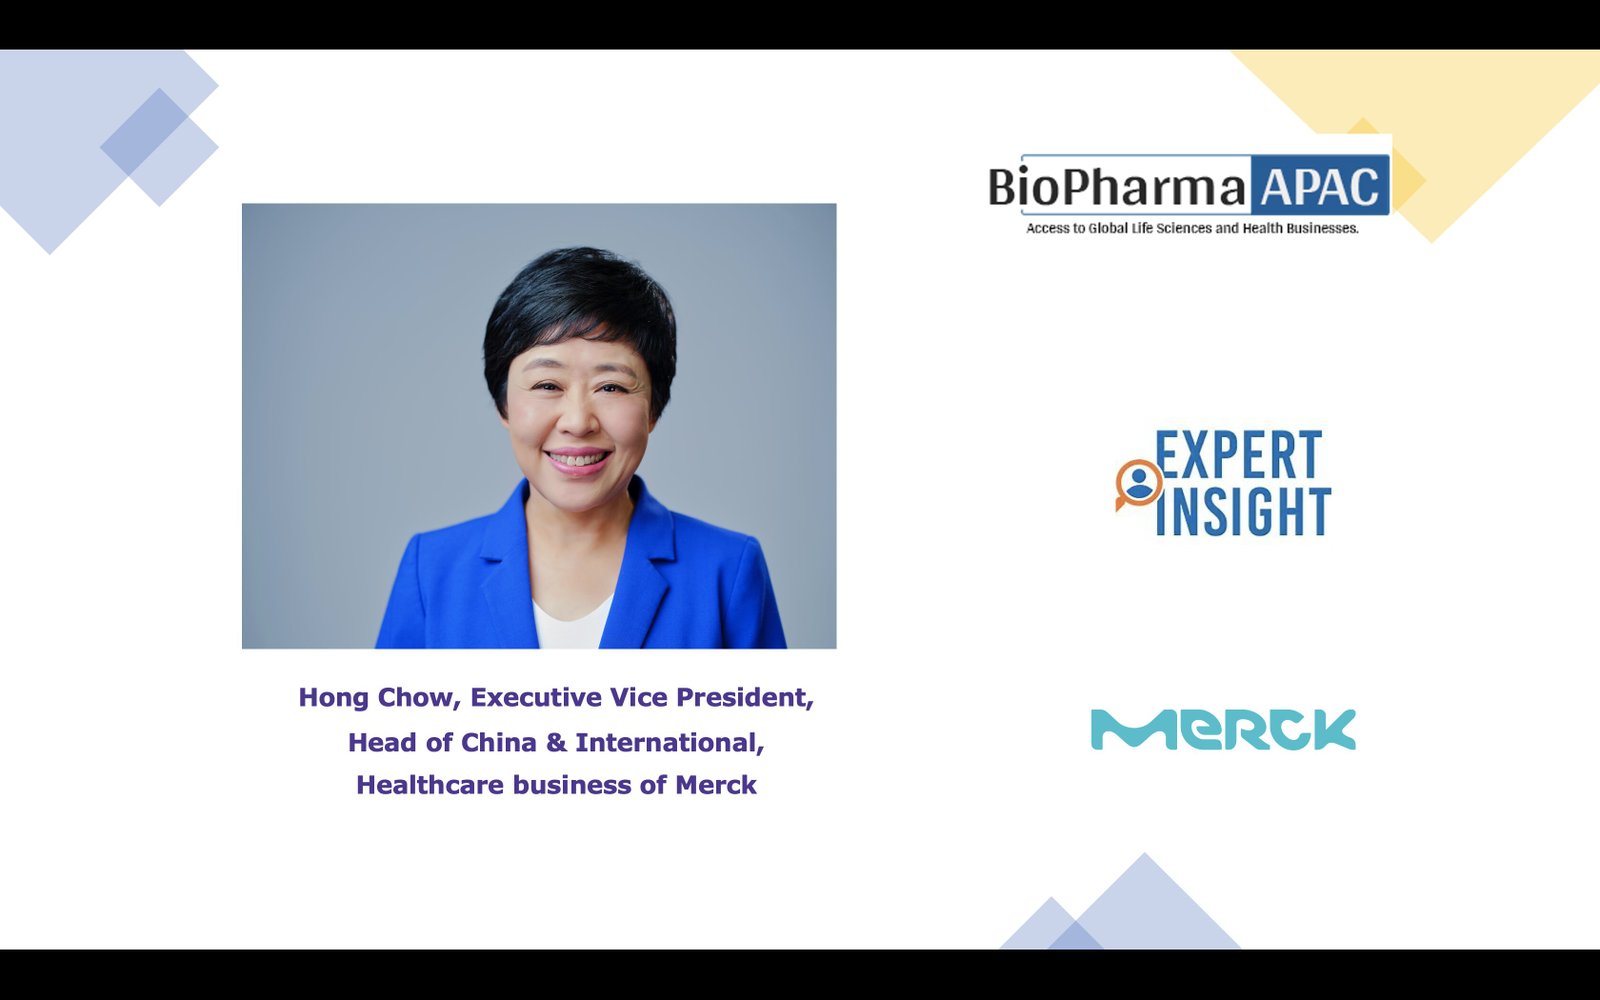  Hong Chow, Executive Vice President, Head of China & International, Healthcare Business of Merck